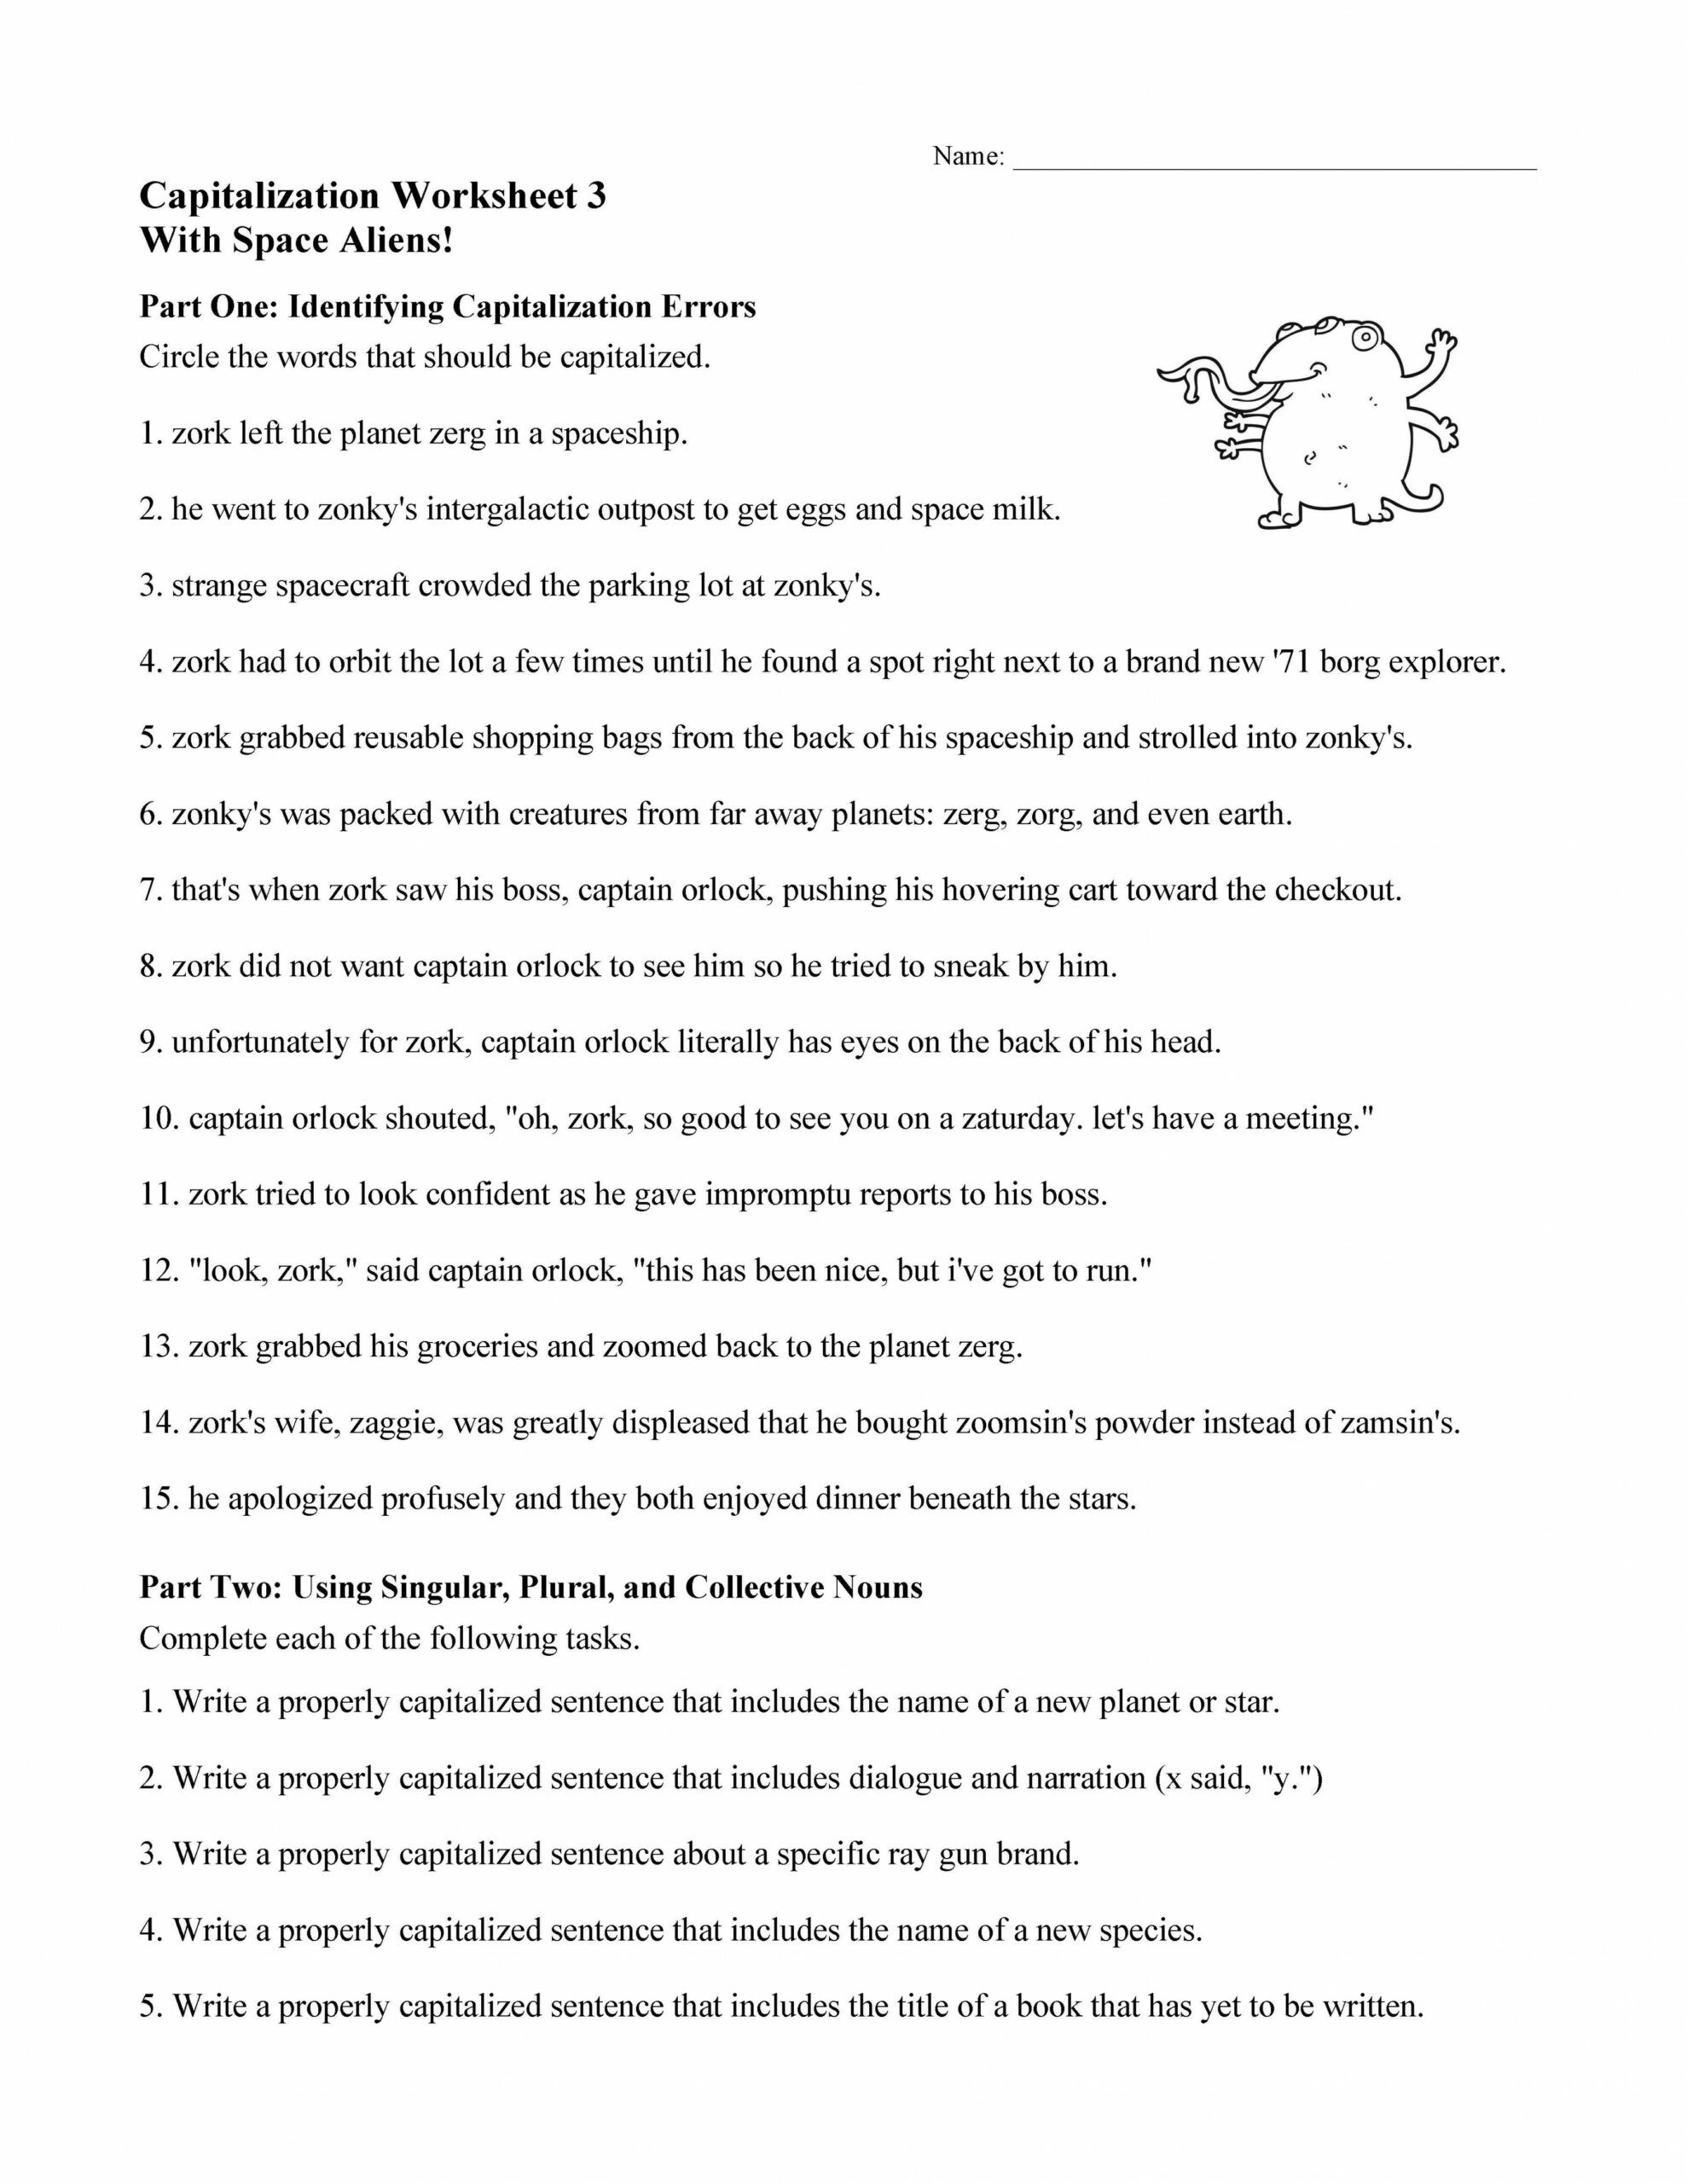 Capitalization Worksheets, Lessons, and Tests  Language Arts